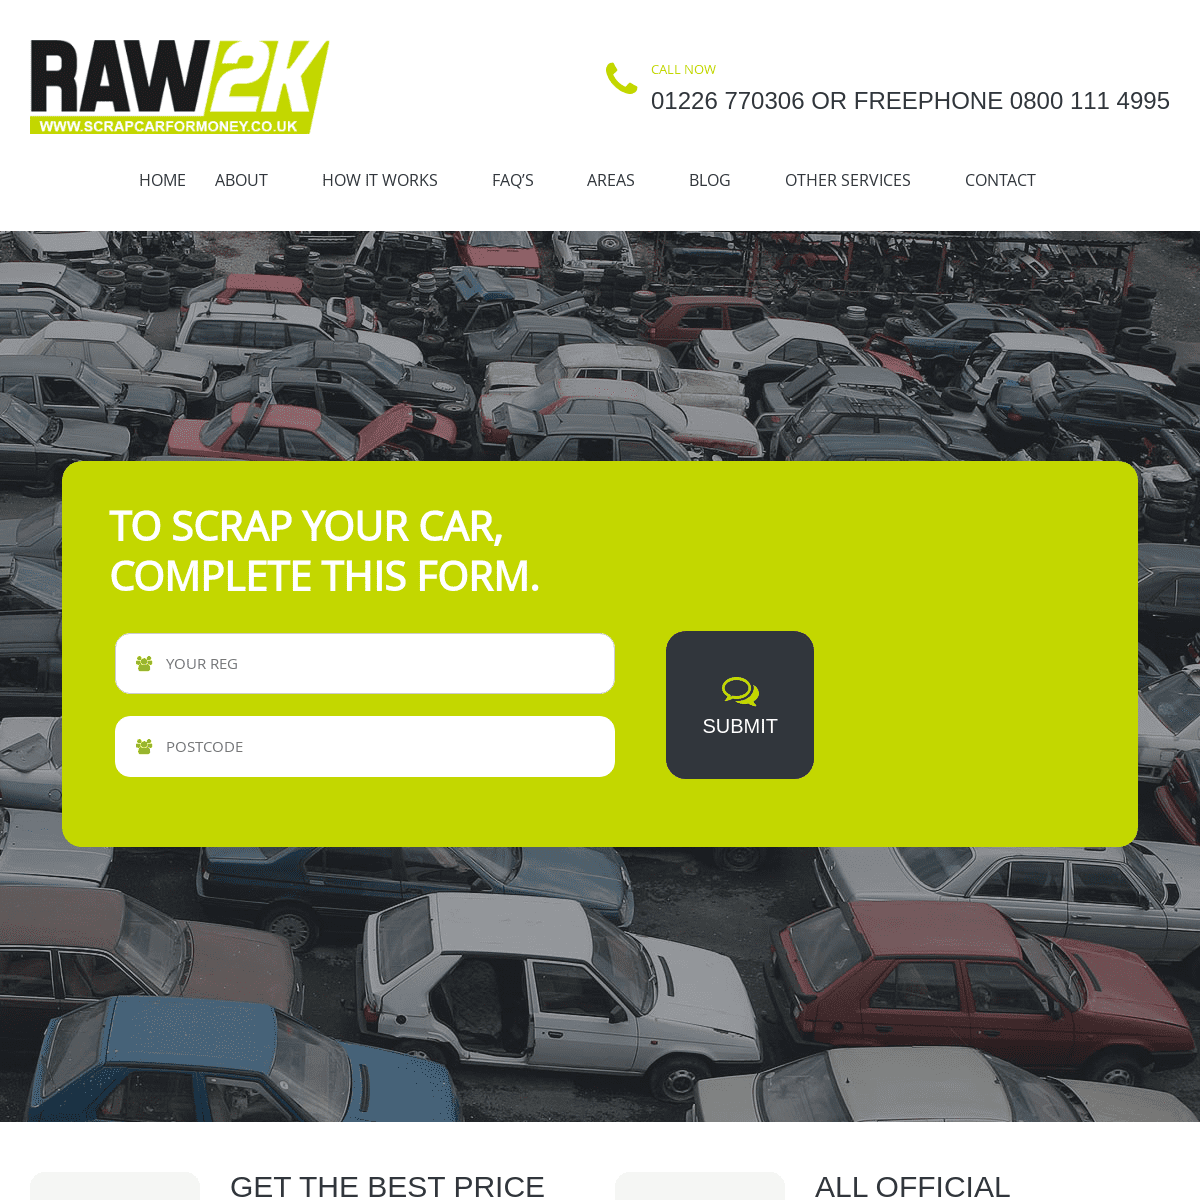 Scrap your car, cash paid, free collection and disposal.